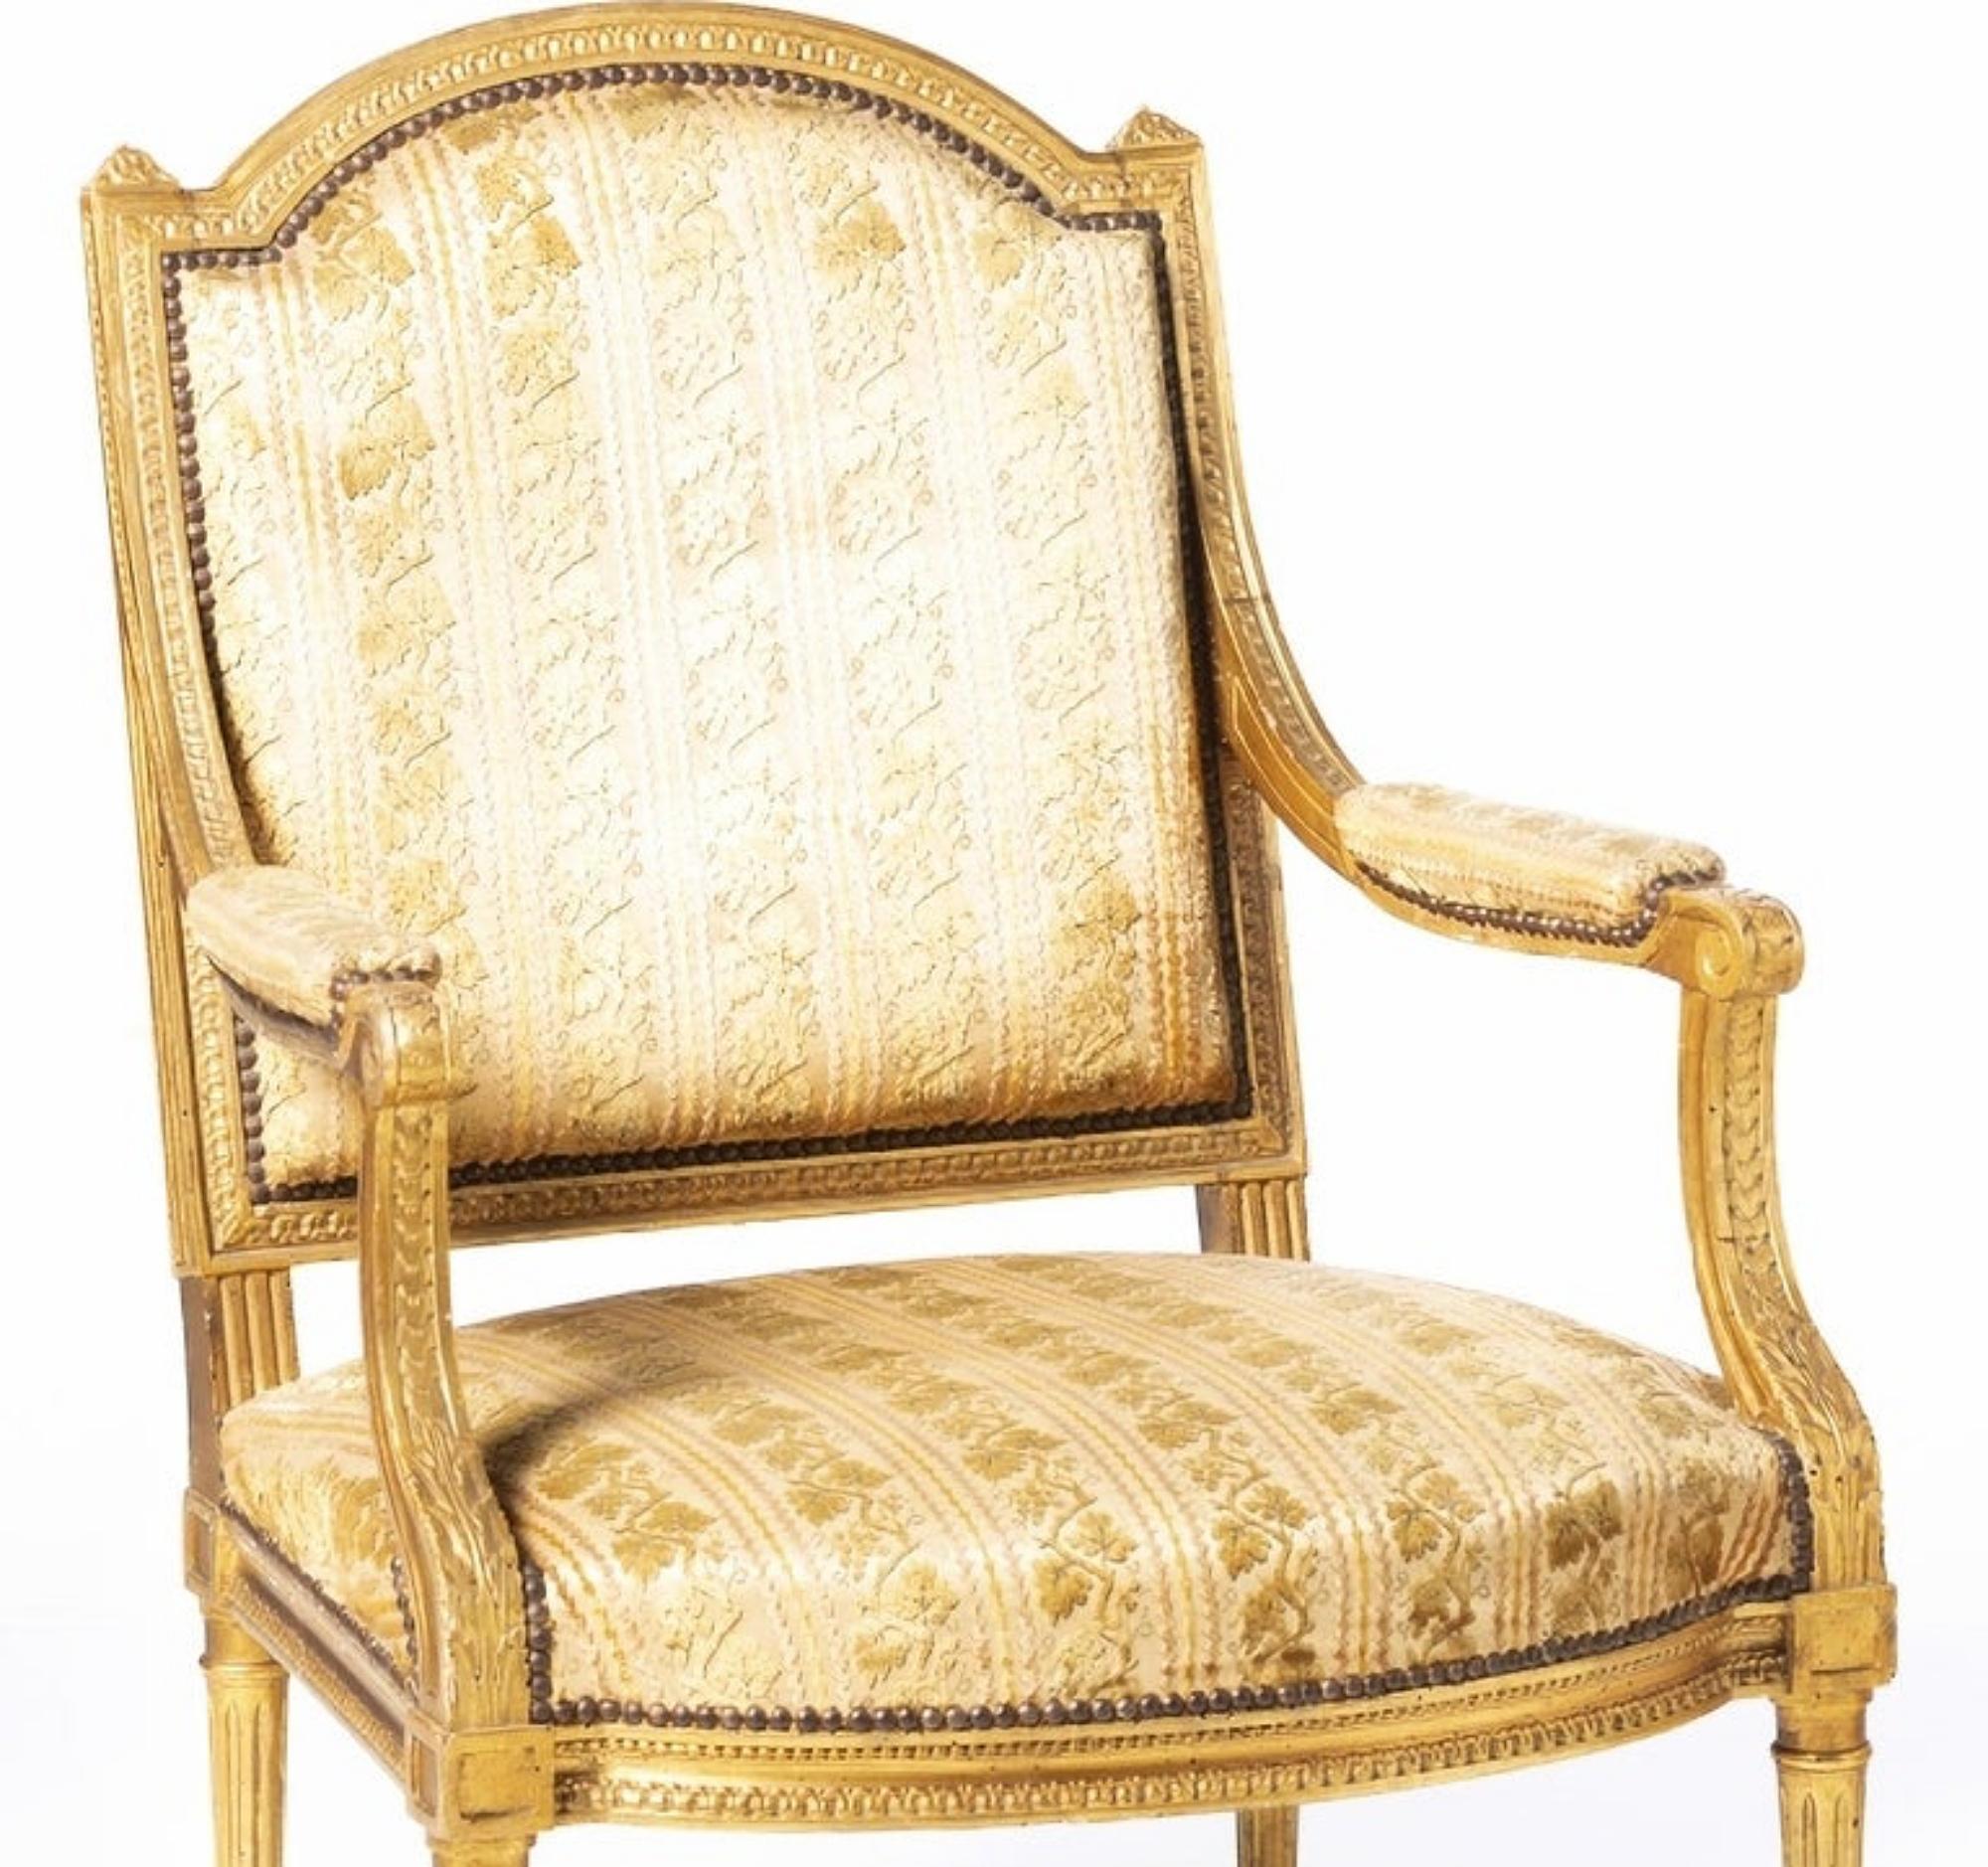 Pair of Louis XVI style Fauteuils
French, from the end of the 19th century 
in carved and gilded wood. 
Backrests, backrests and seats upholstered in fabric with floral decoration. 
Dim.: 92 x 55 x 52 cm.